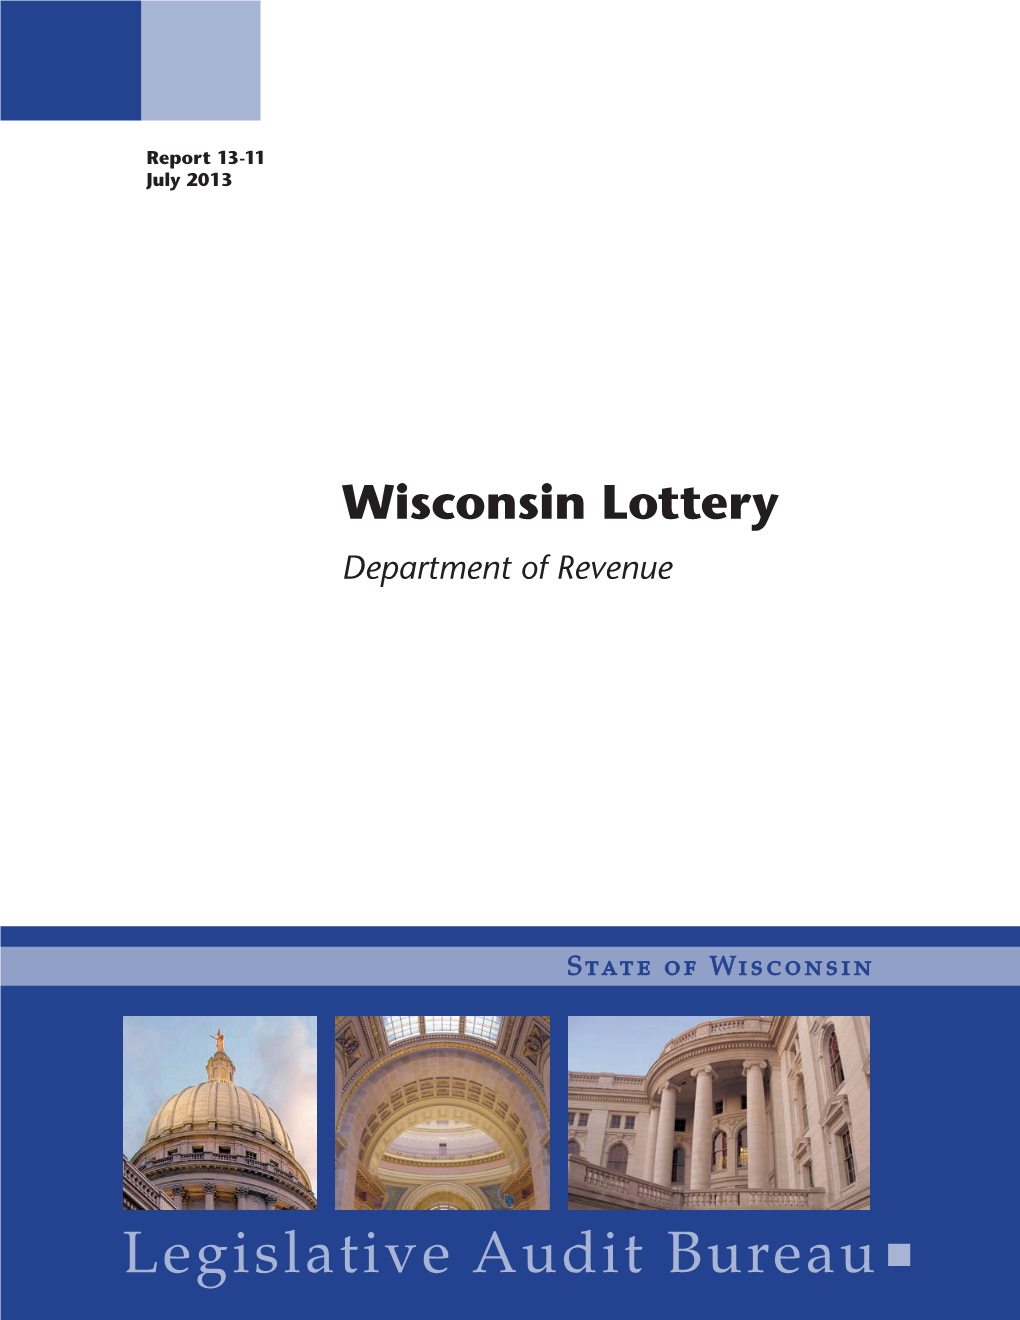 Wisconsin Lottery Department of Revenue